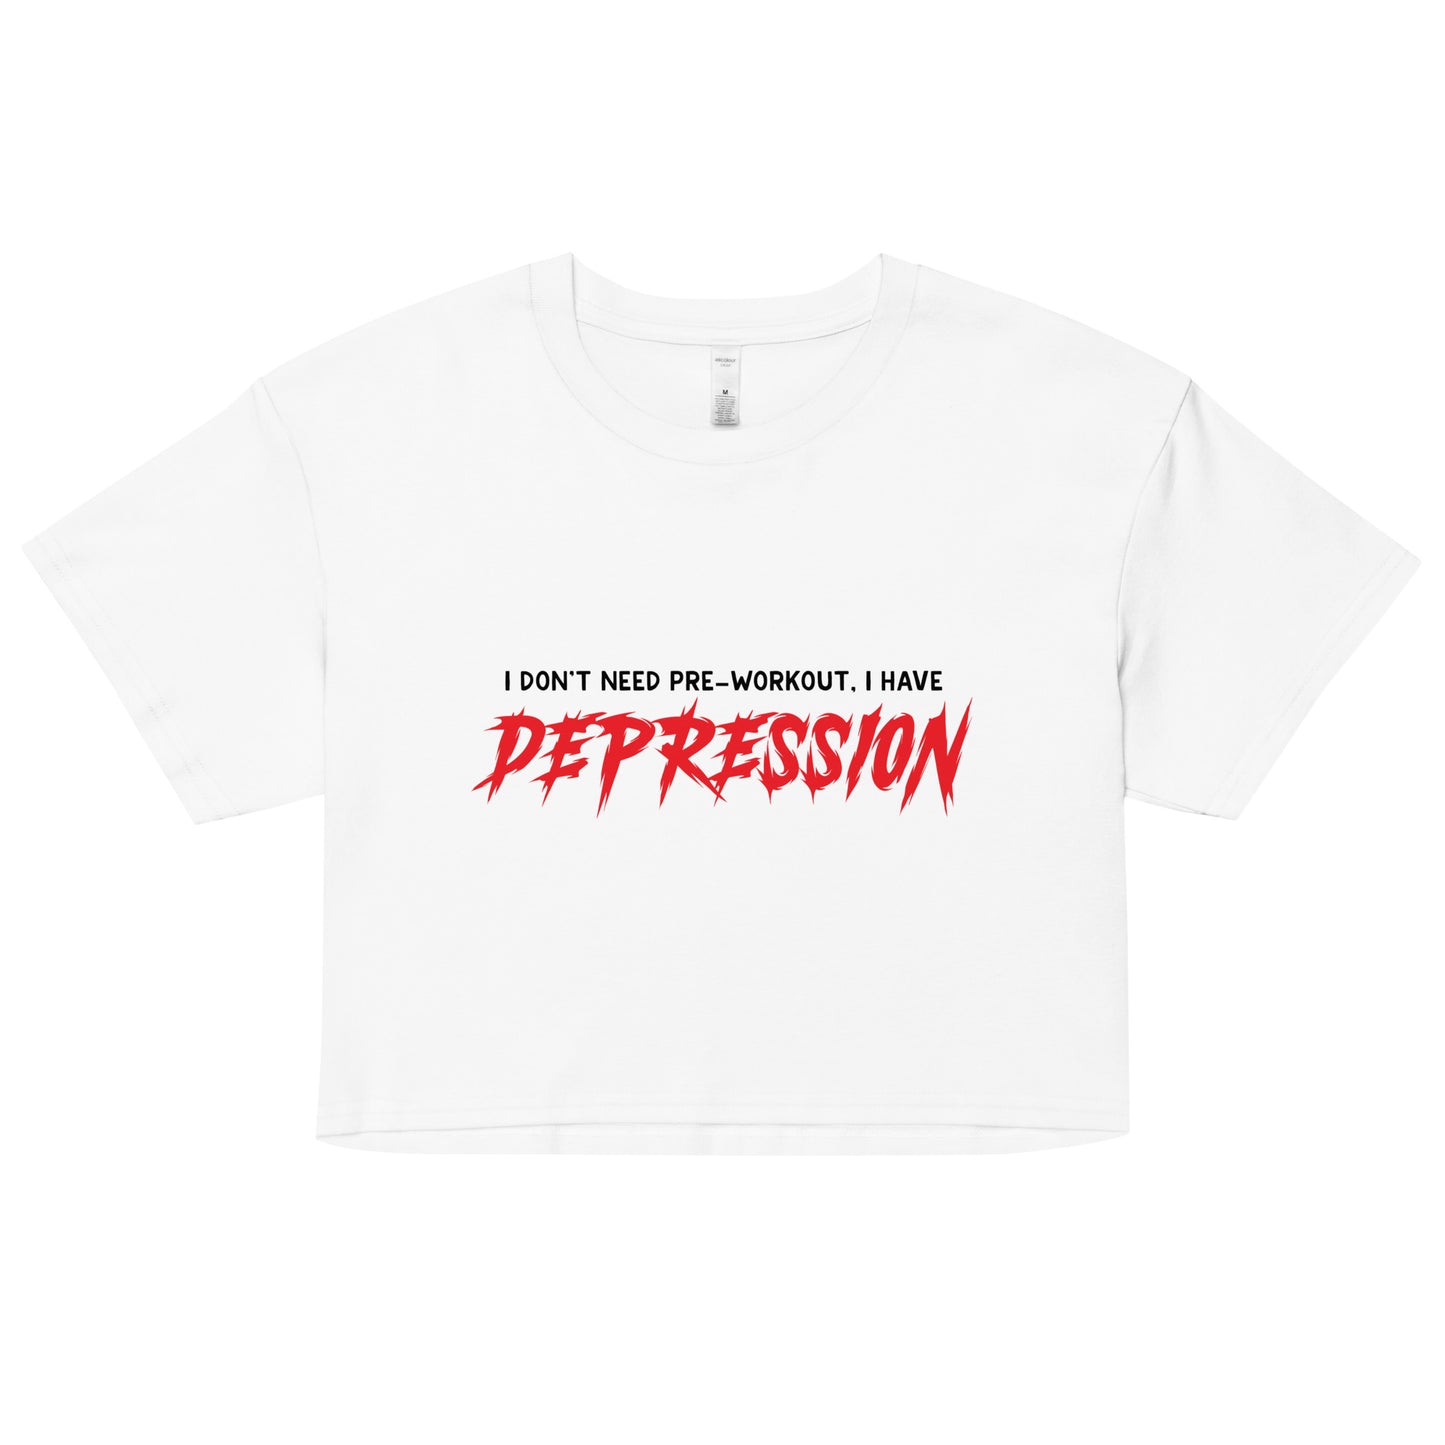 I Don't Need Pre-Workout I Have Depression Women’s crop top